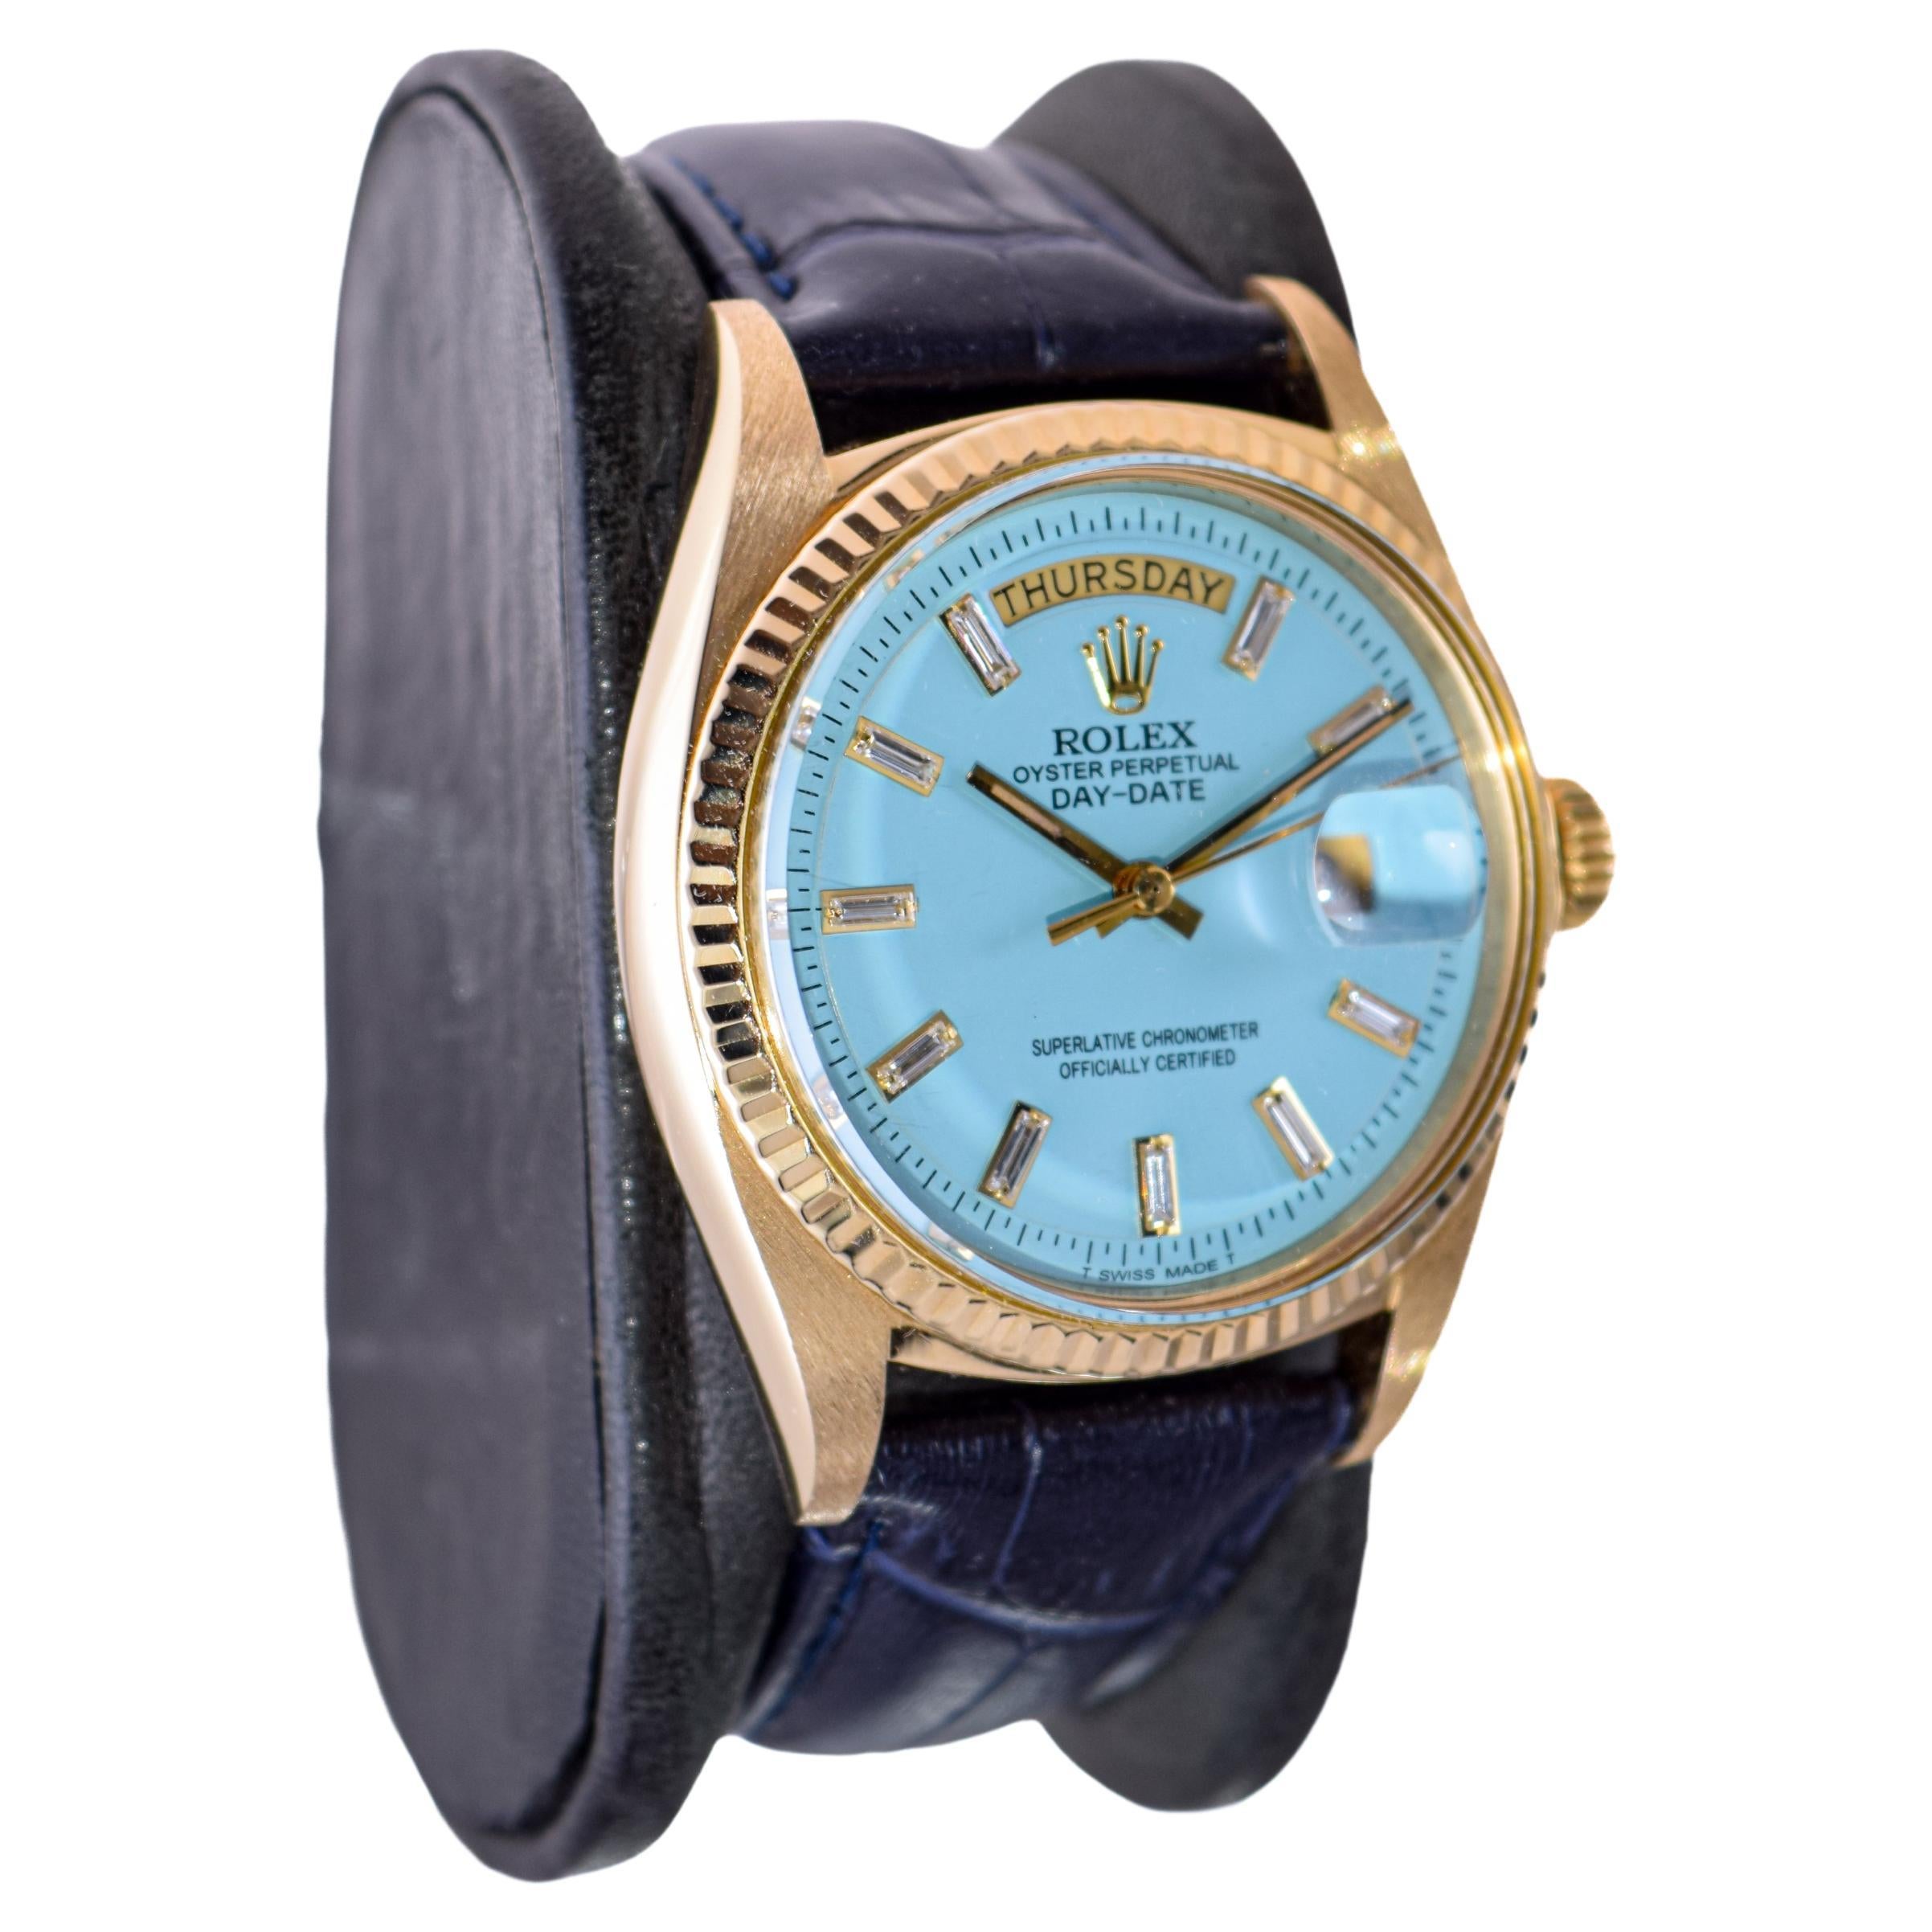 FACTORY / HOUSE: Rolex Watch Company
STYLE / REFERENCE: President / Reference 1803
METAL / MATERIAL: 18Kt. Solid Yellow Gold 
CIRCA / YEAR: 1970
DIMENSIONS / SIZE:  Length 44mm X Diameter 36mm
MOVEMENT / CALIBER: Perpetual Winding / 26 Jewels /